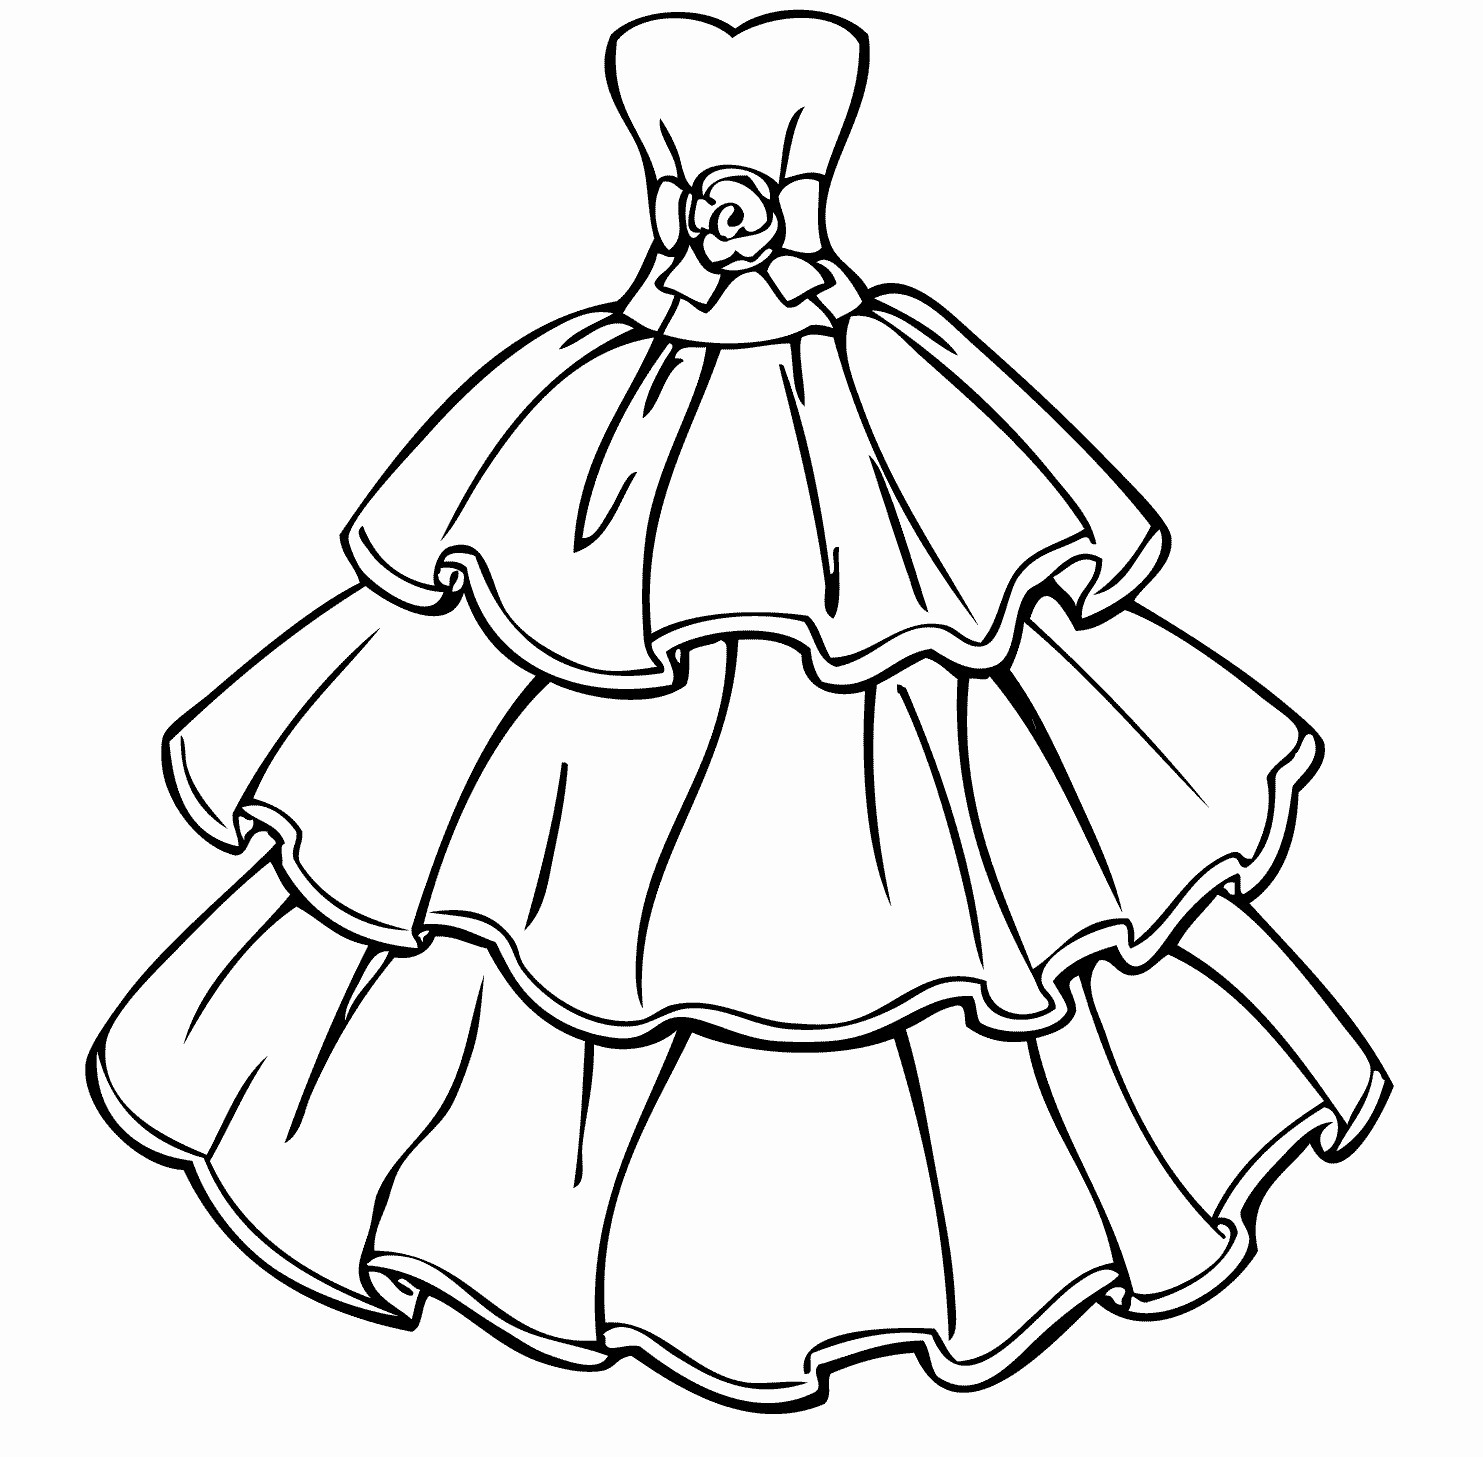 Dress Sketch Template at PaintingValley com Explore collection of